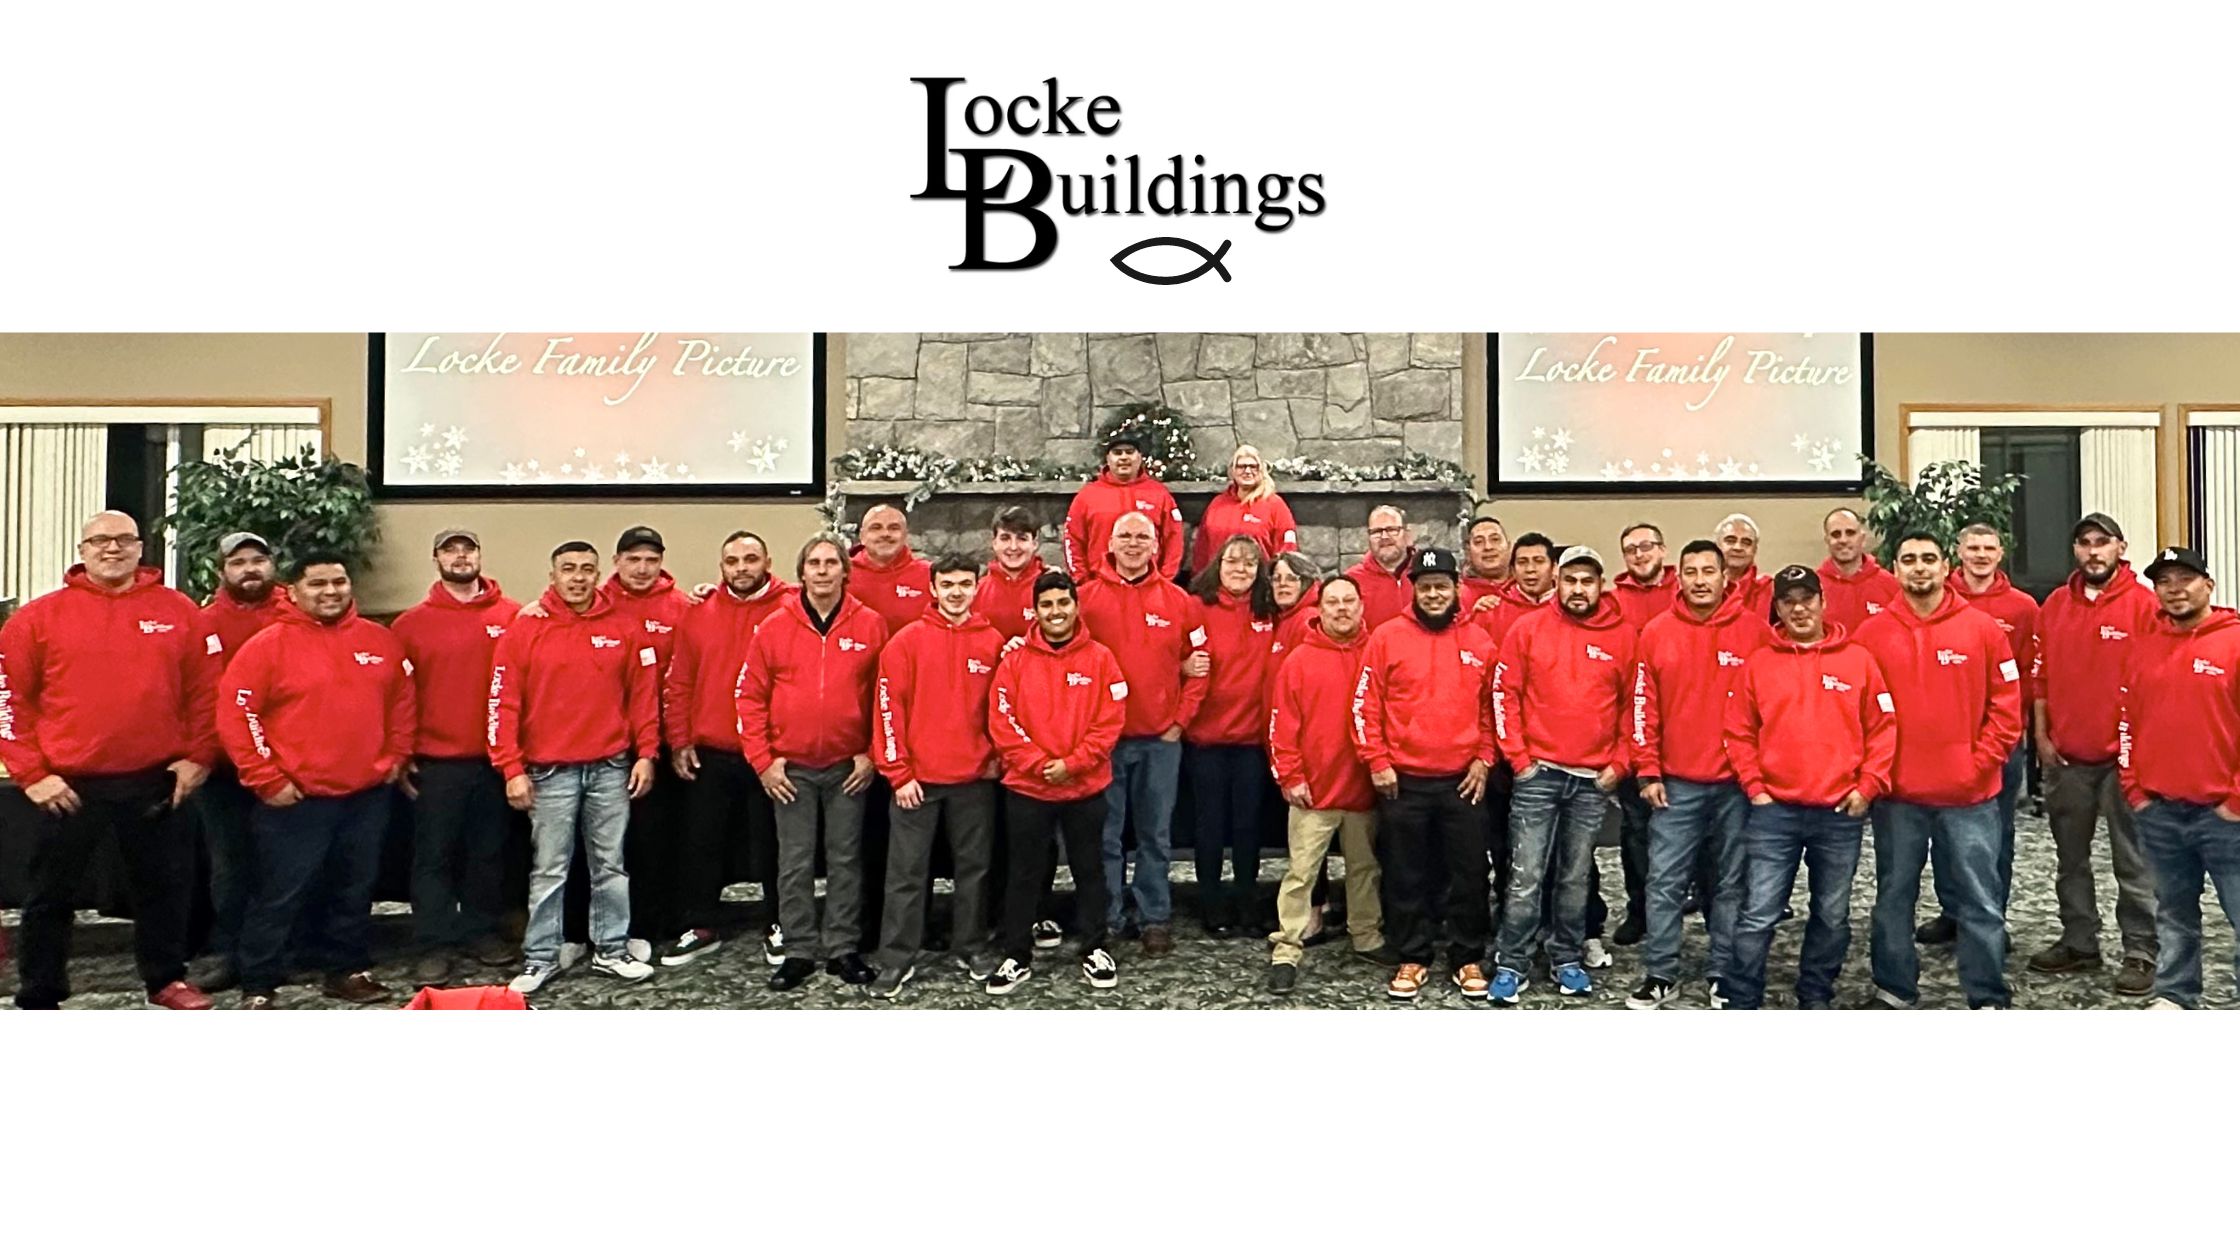 Pole Buildings, Pole Barns, Industry Leaders, Making a Difference, Employee Appreciation Day, Customer Service, Customer Satisfaction, Integrity, Commitment